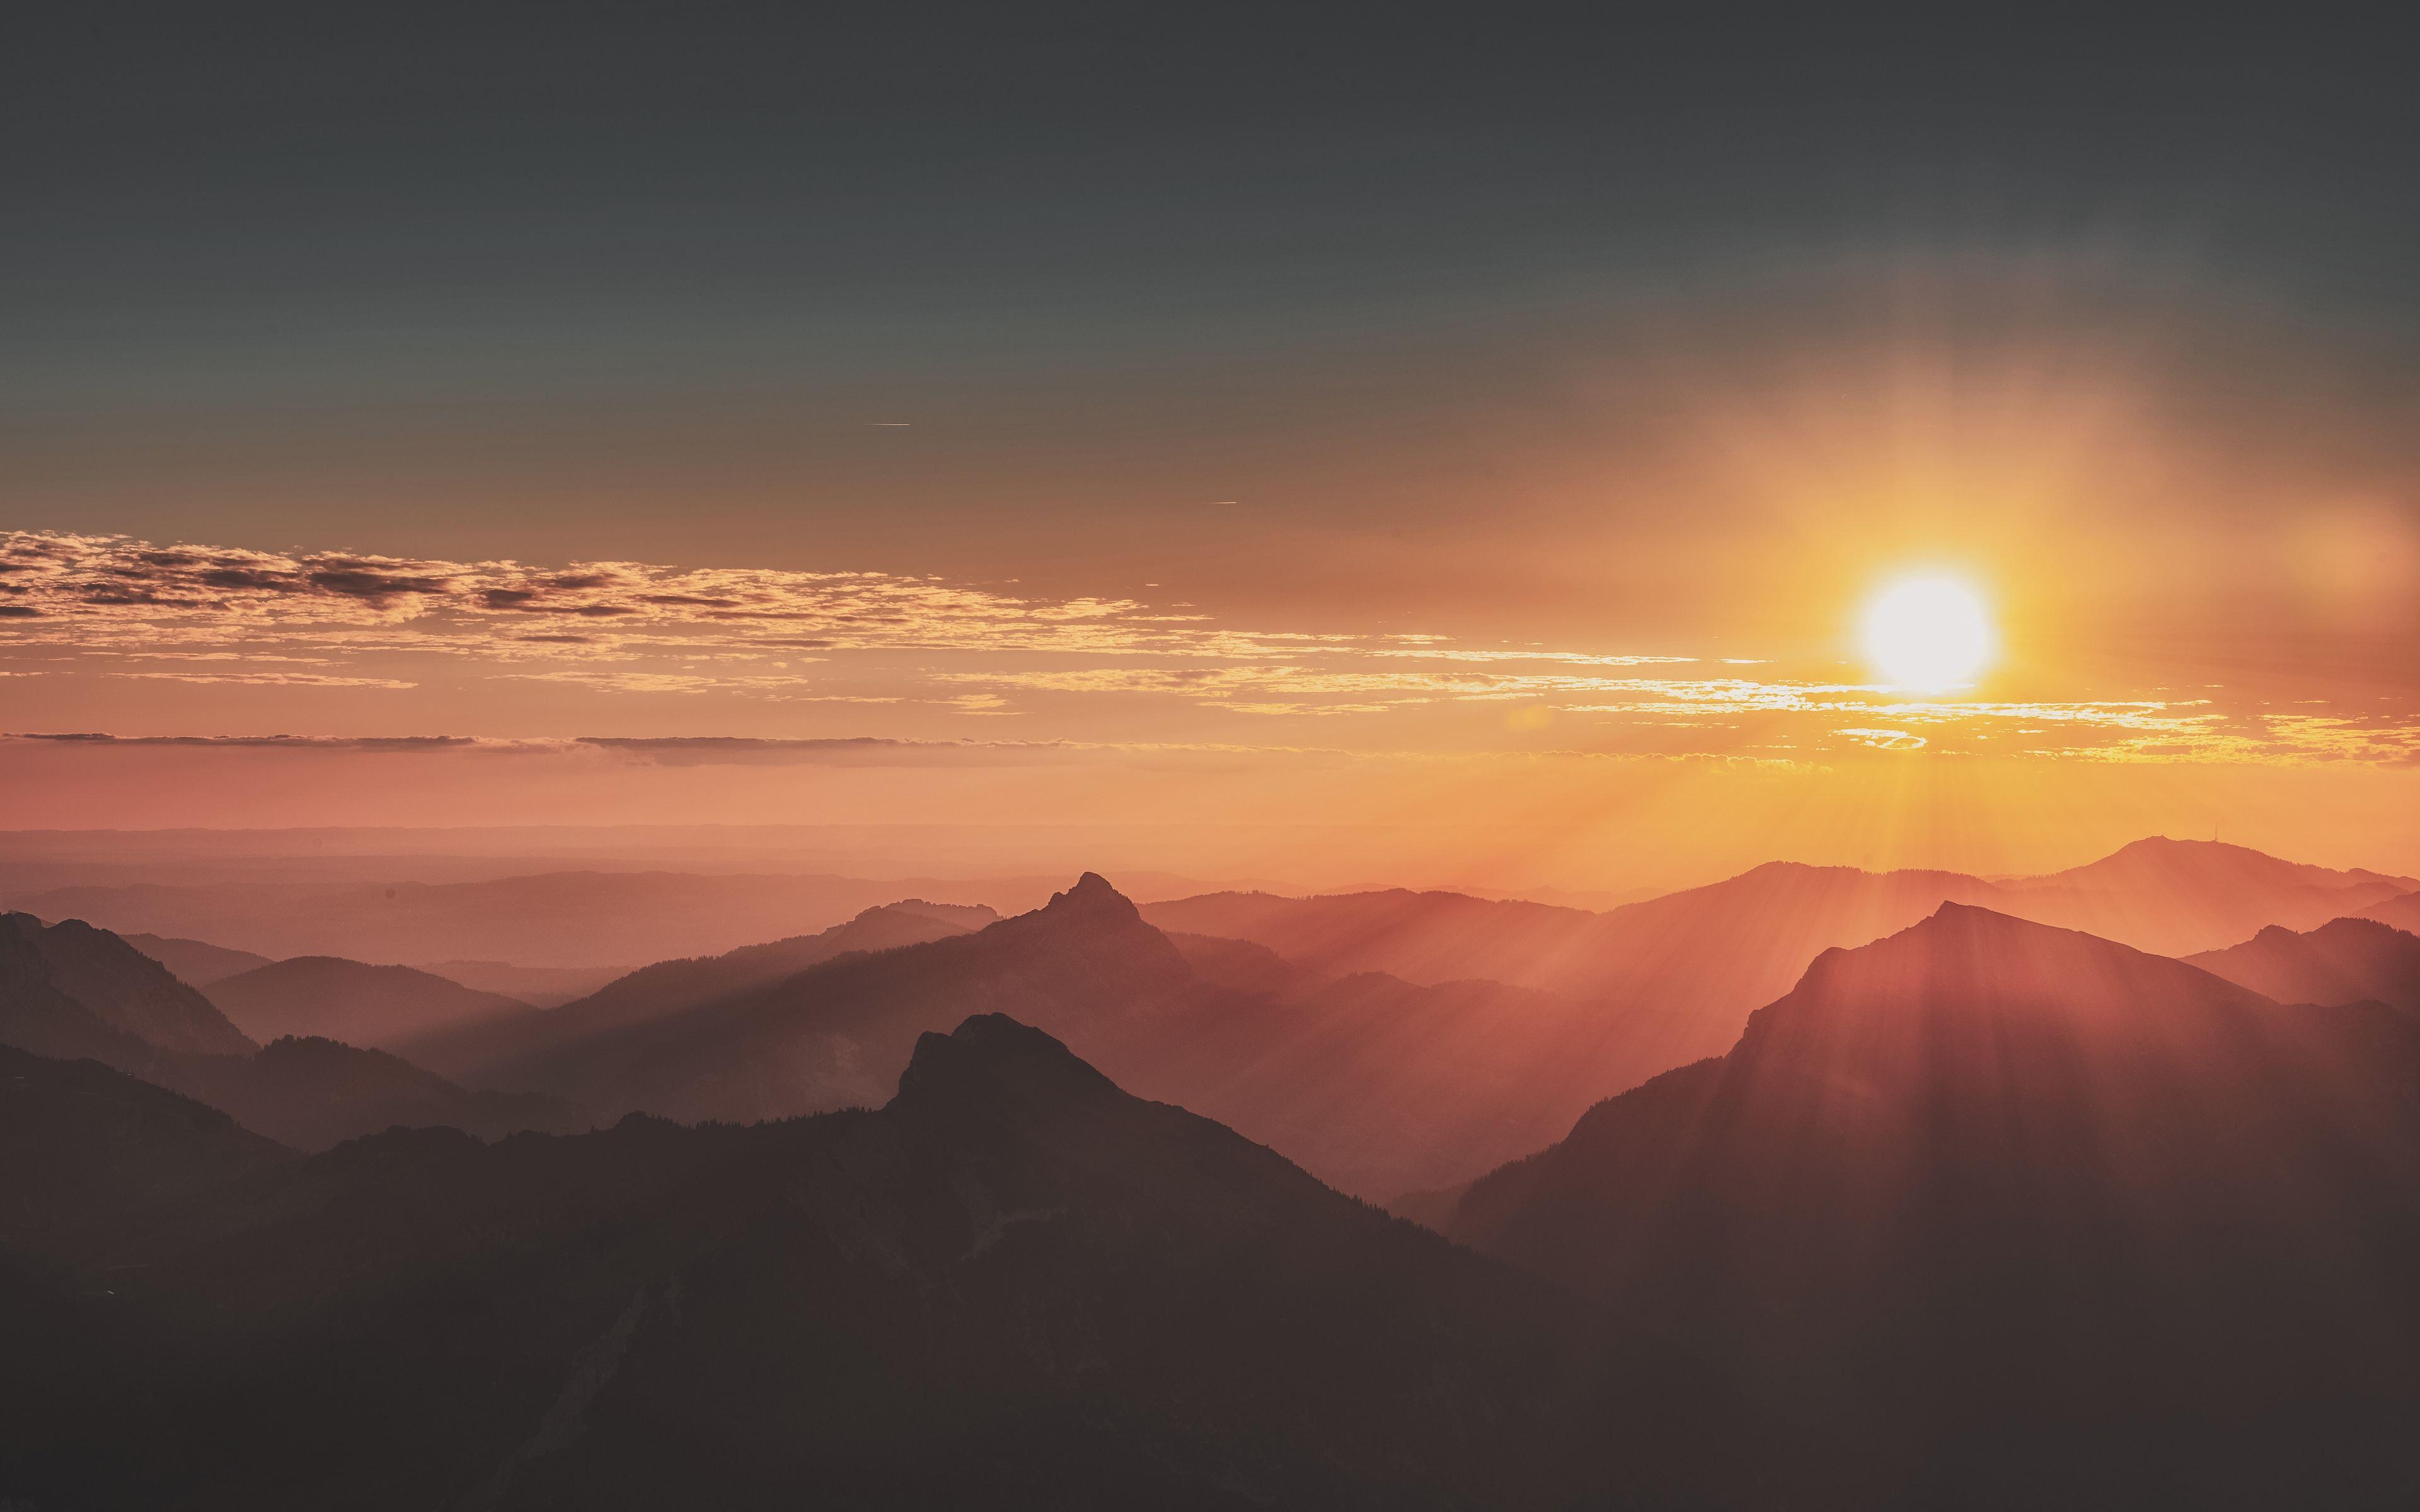 Mountain Sunrise Wallpapers Top Free Mountain Sunrise Backgrounds